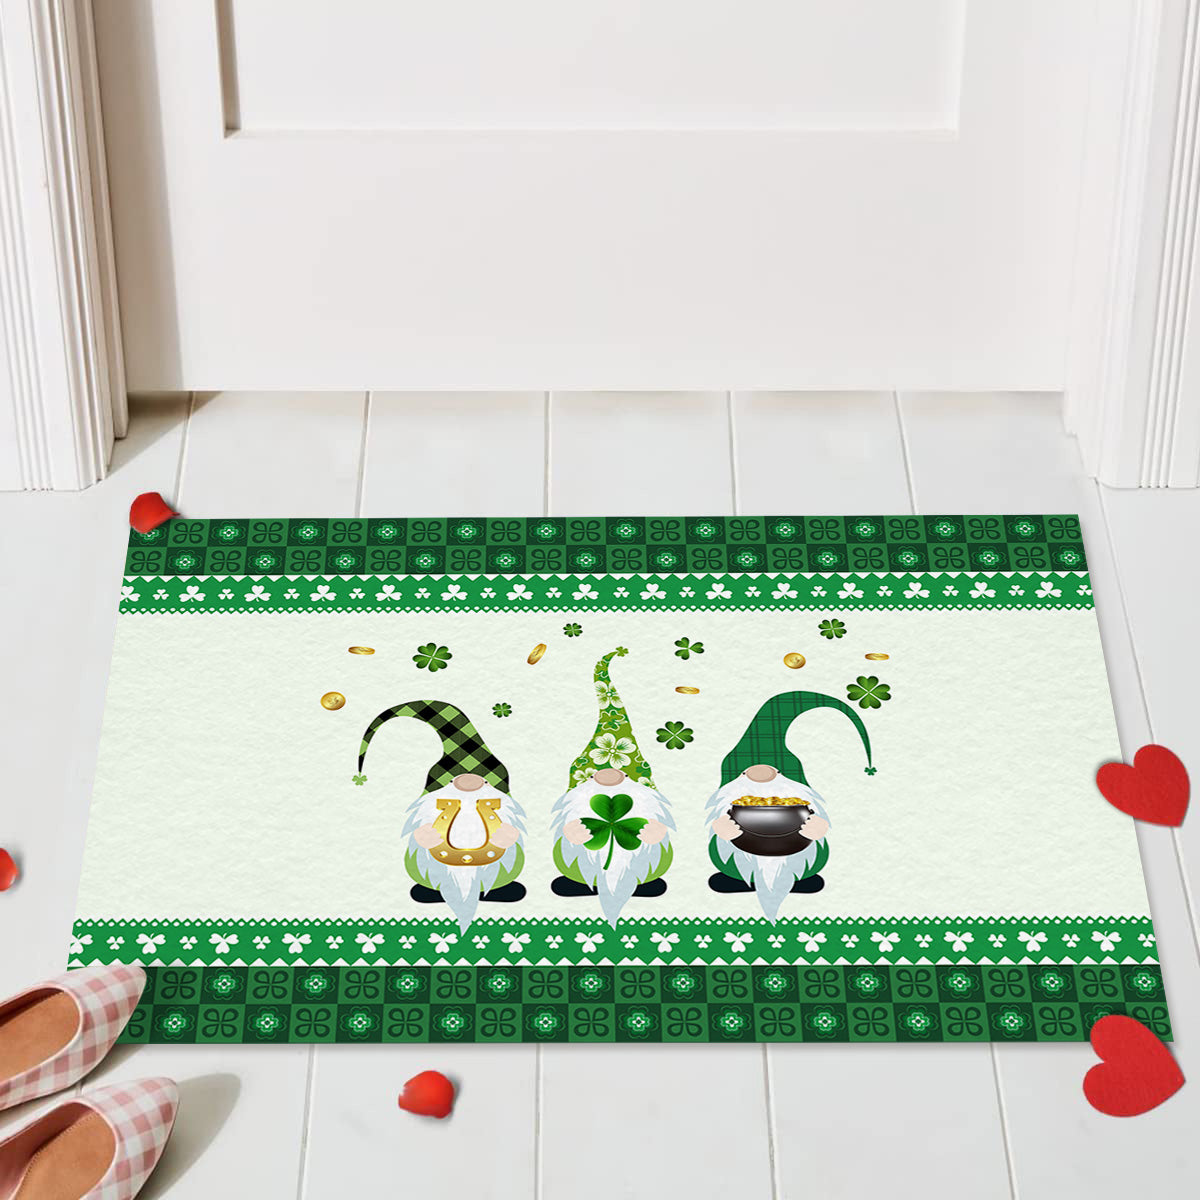 Happy Gnome Brother - St. Patrick's Day Doormat